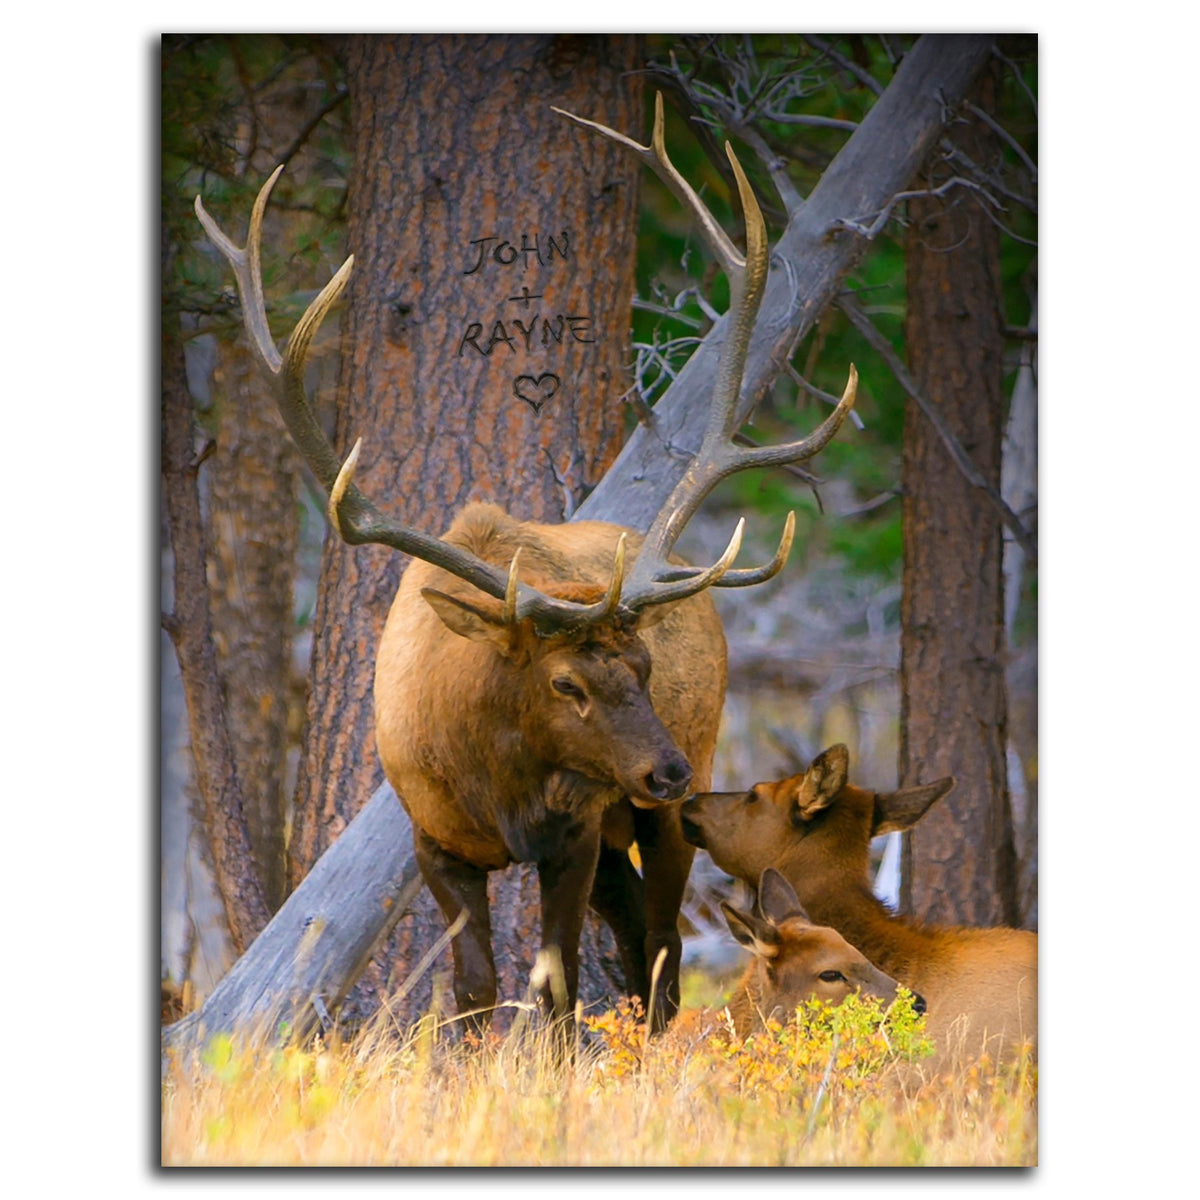 Rustic cabin decor elk print featuring two elk in the woods, one laying down reaching up to kiss the other - Mounted to Wood Block